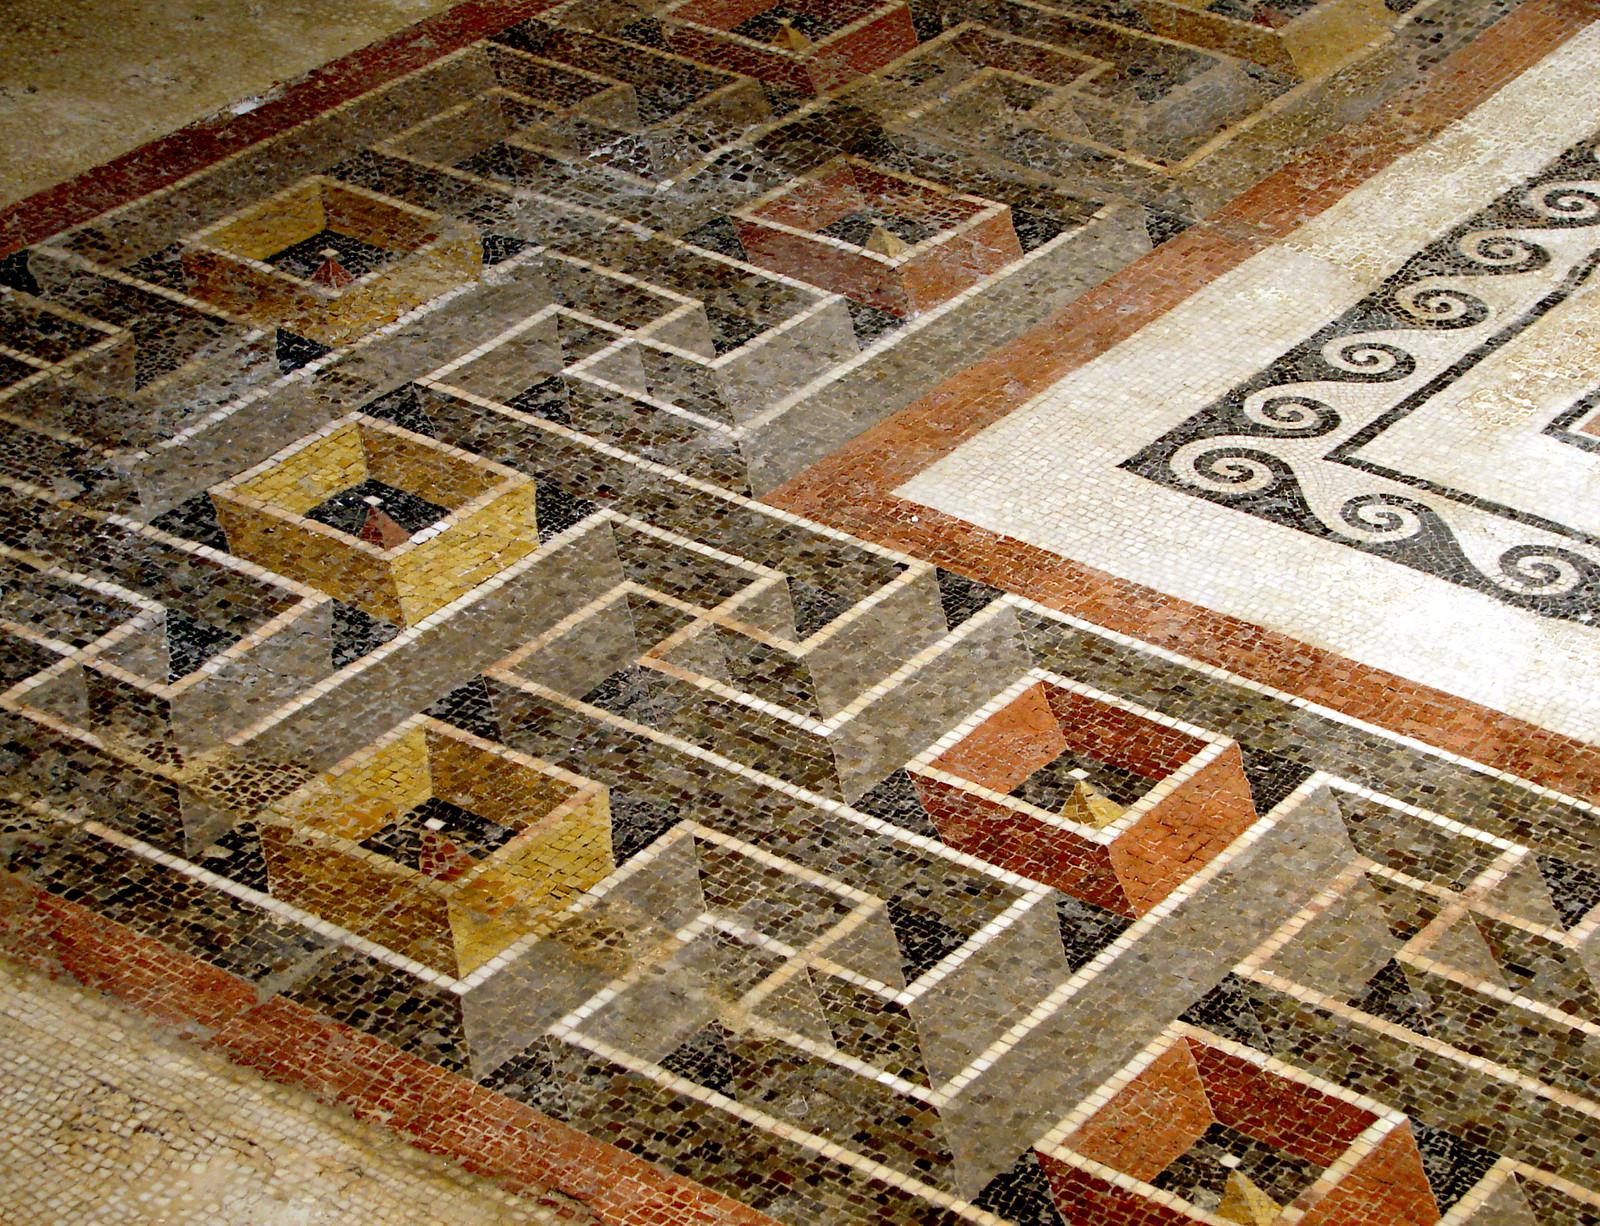 Detail of the Roman mosaic of the peristyle of the Domus Romana in Malta, showing its astounding 3D effect which must have been the achievement of the best craftsmen of the time. 1st century BCE.jpg